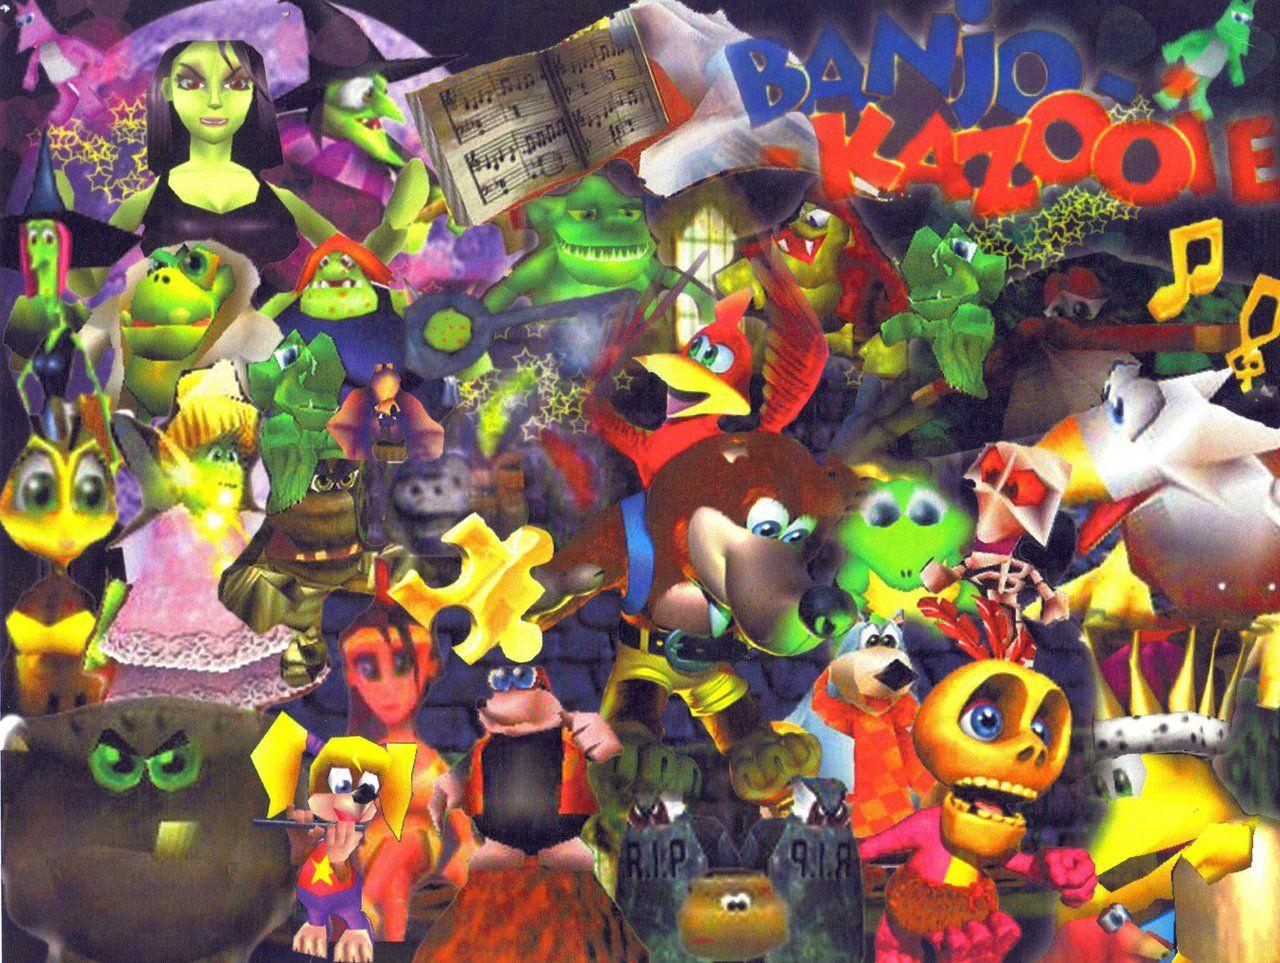 Banjo Kazooie Tooie Wallpaper HD + Nuts And Bolts + Nintendo 64